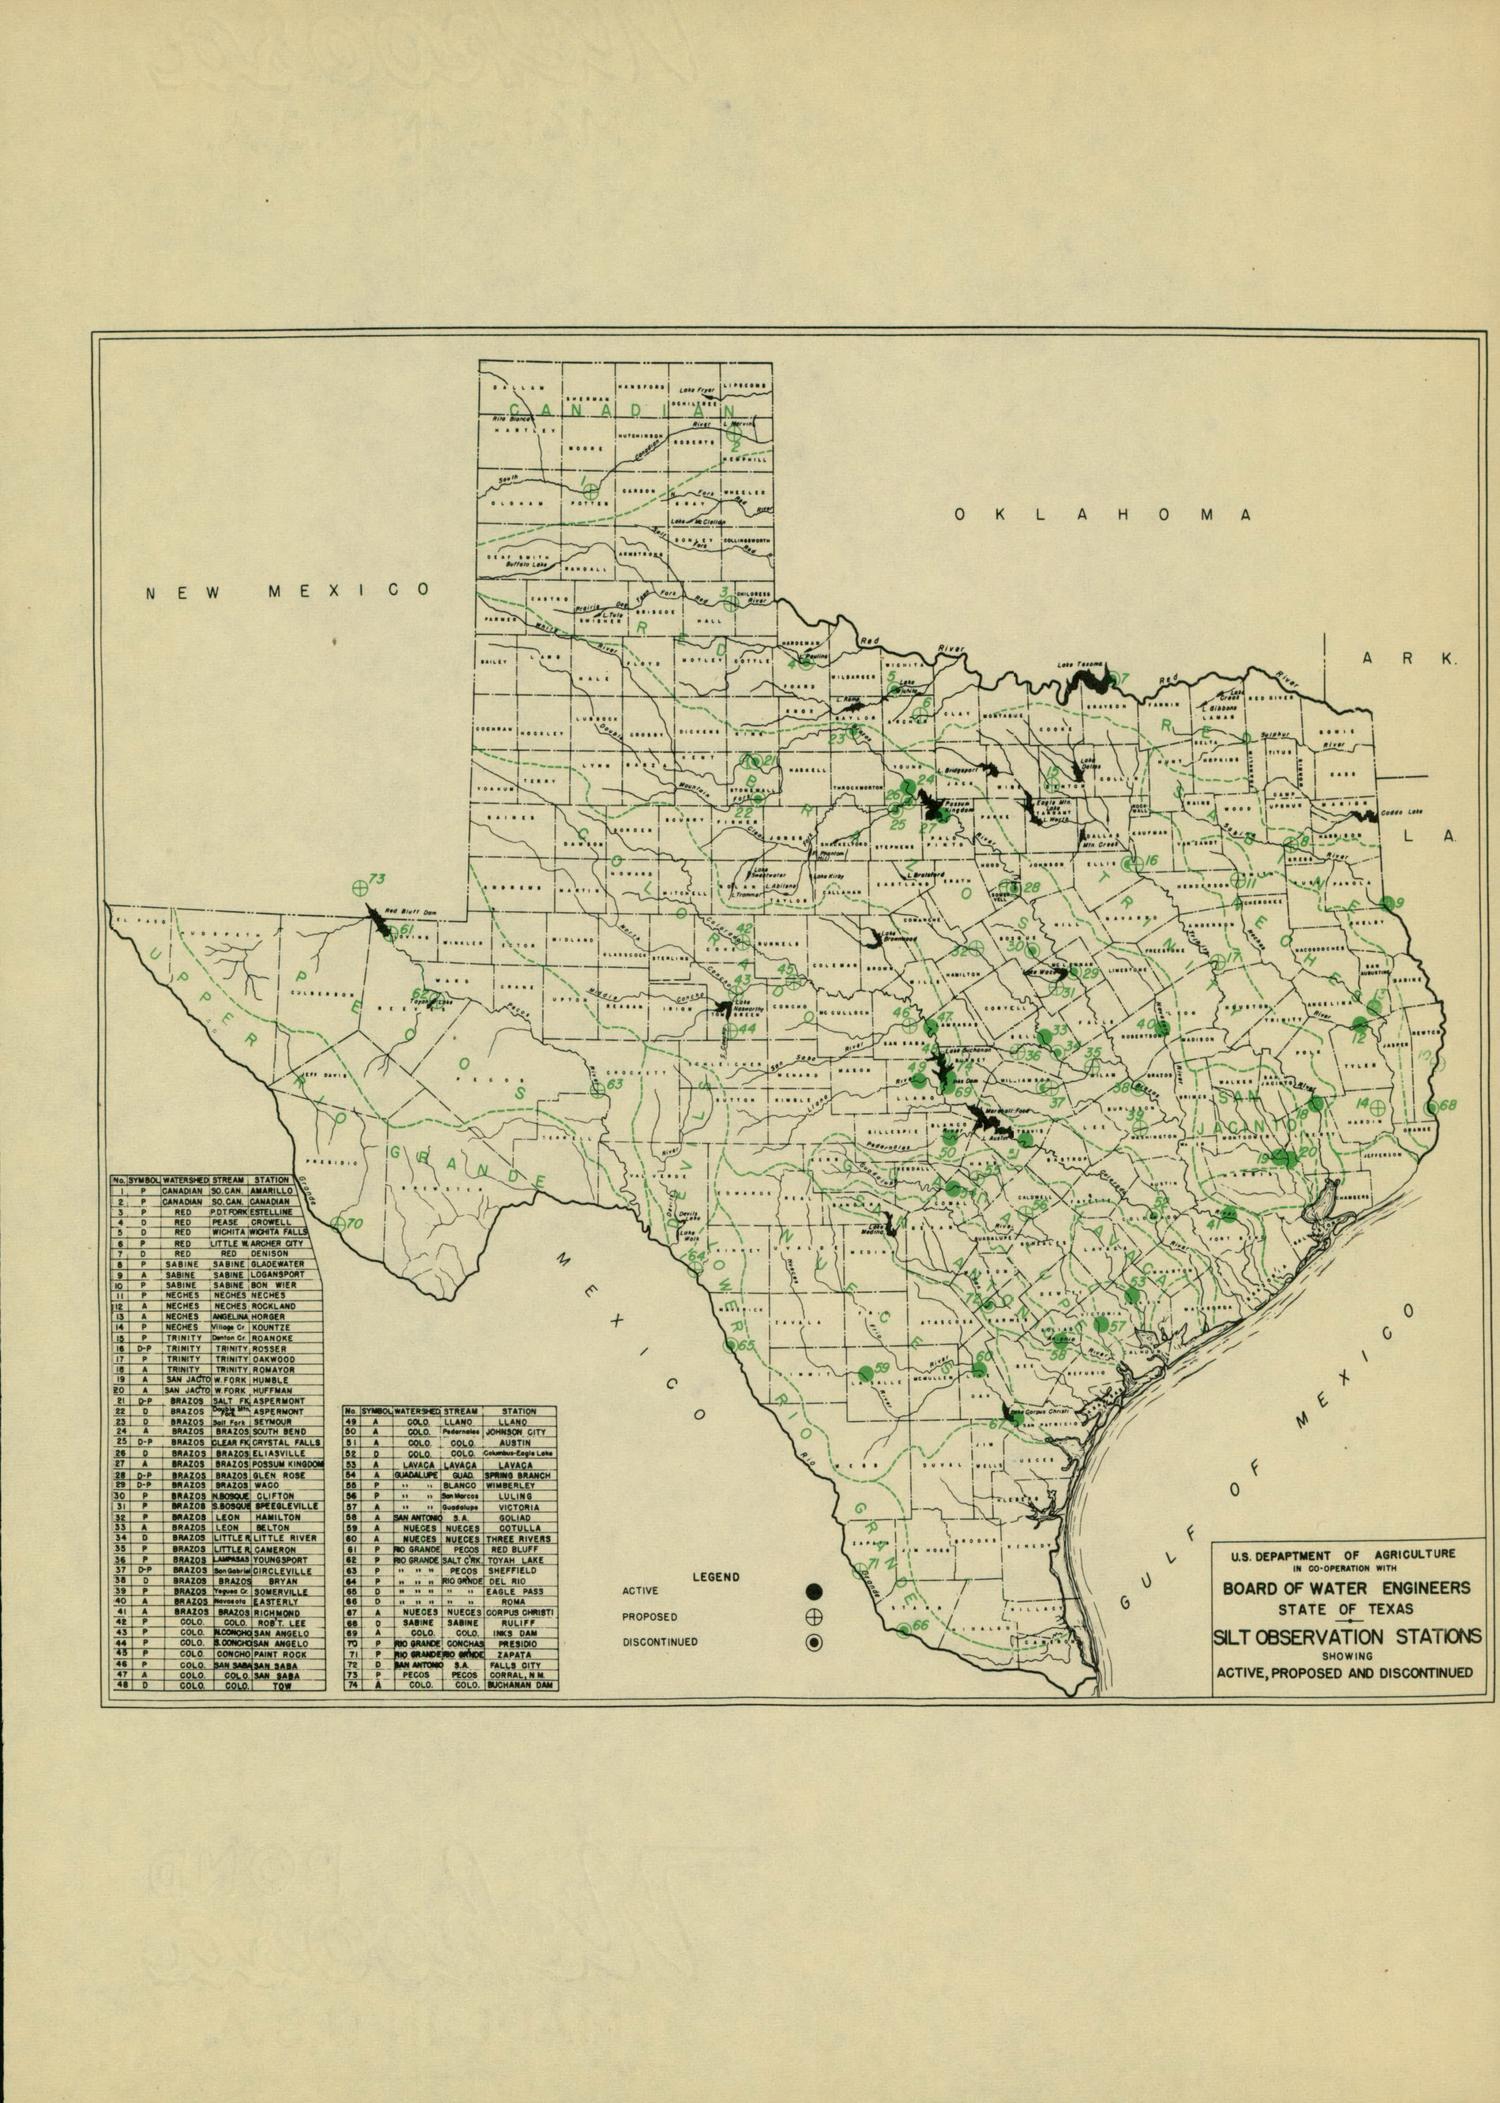 Progress Report Number 10 of Silt Load of Texas Streams: 1947-1948
                                                
                                                    MAP
                                                